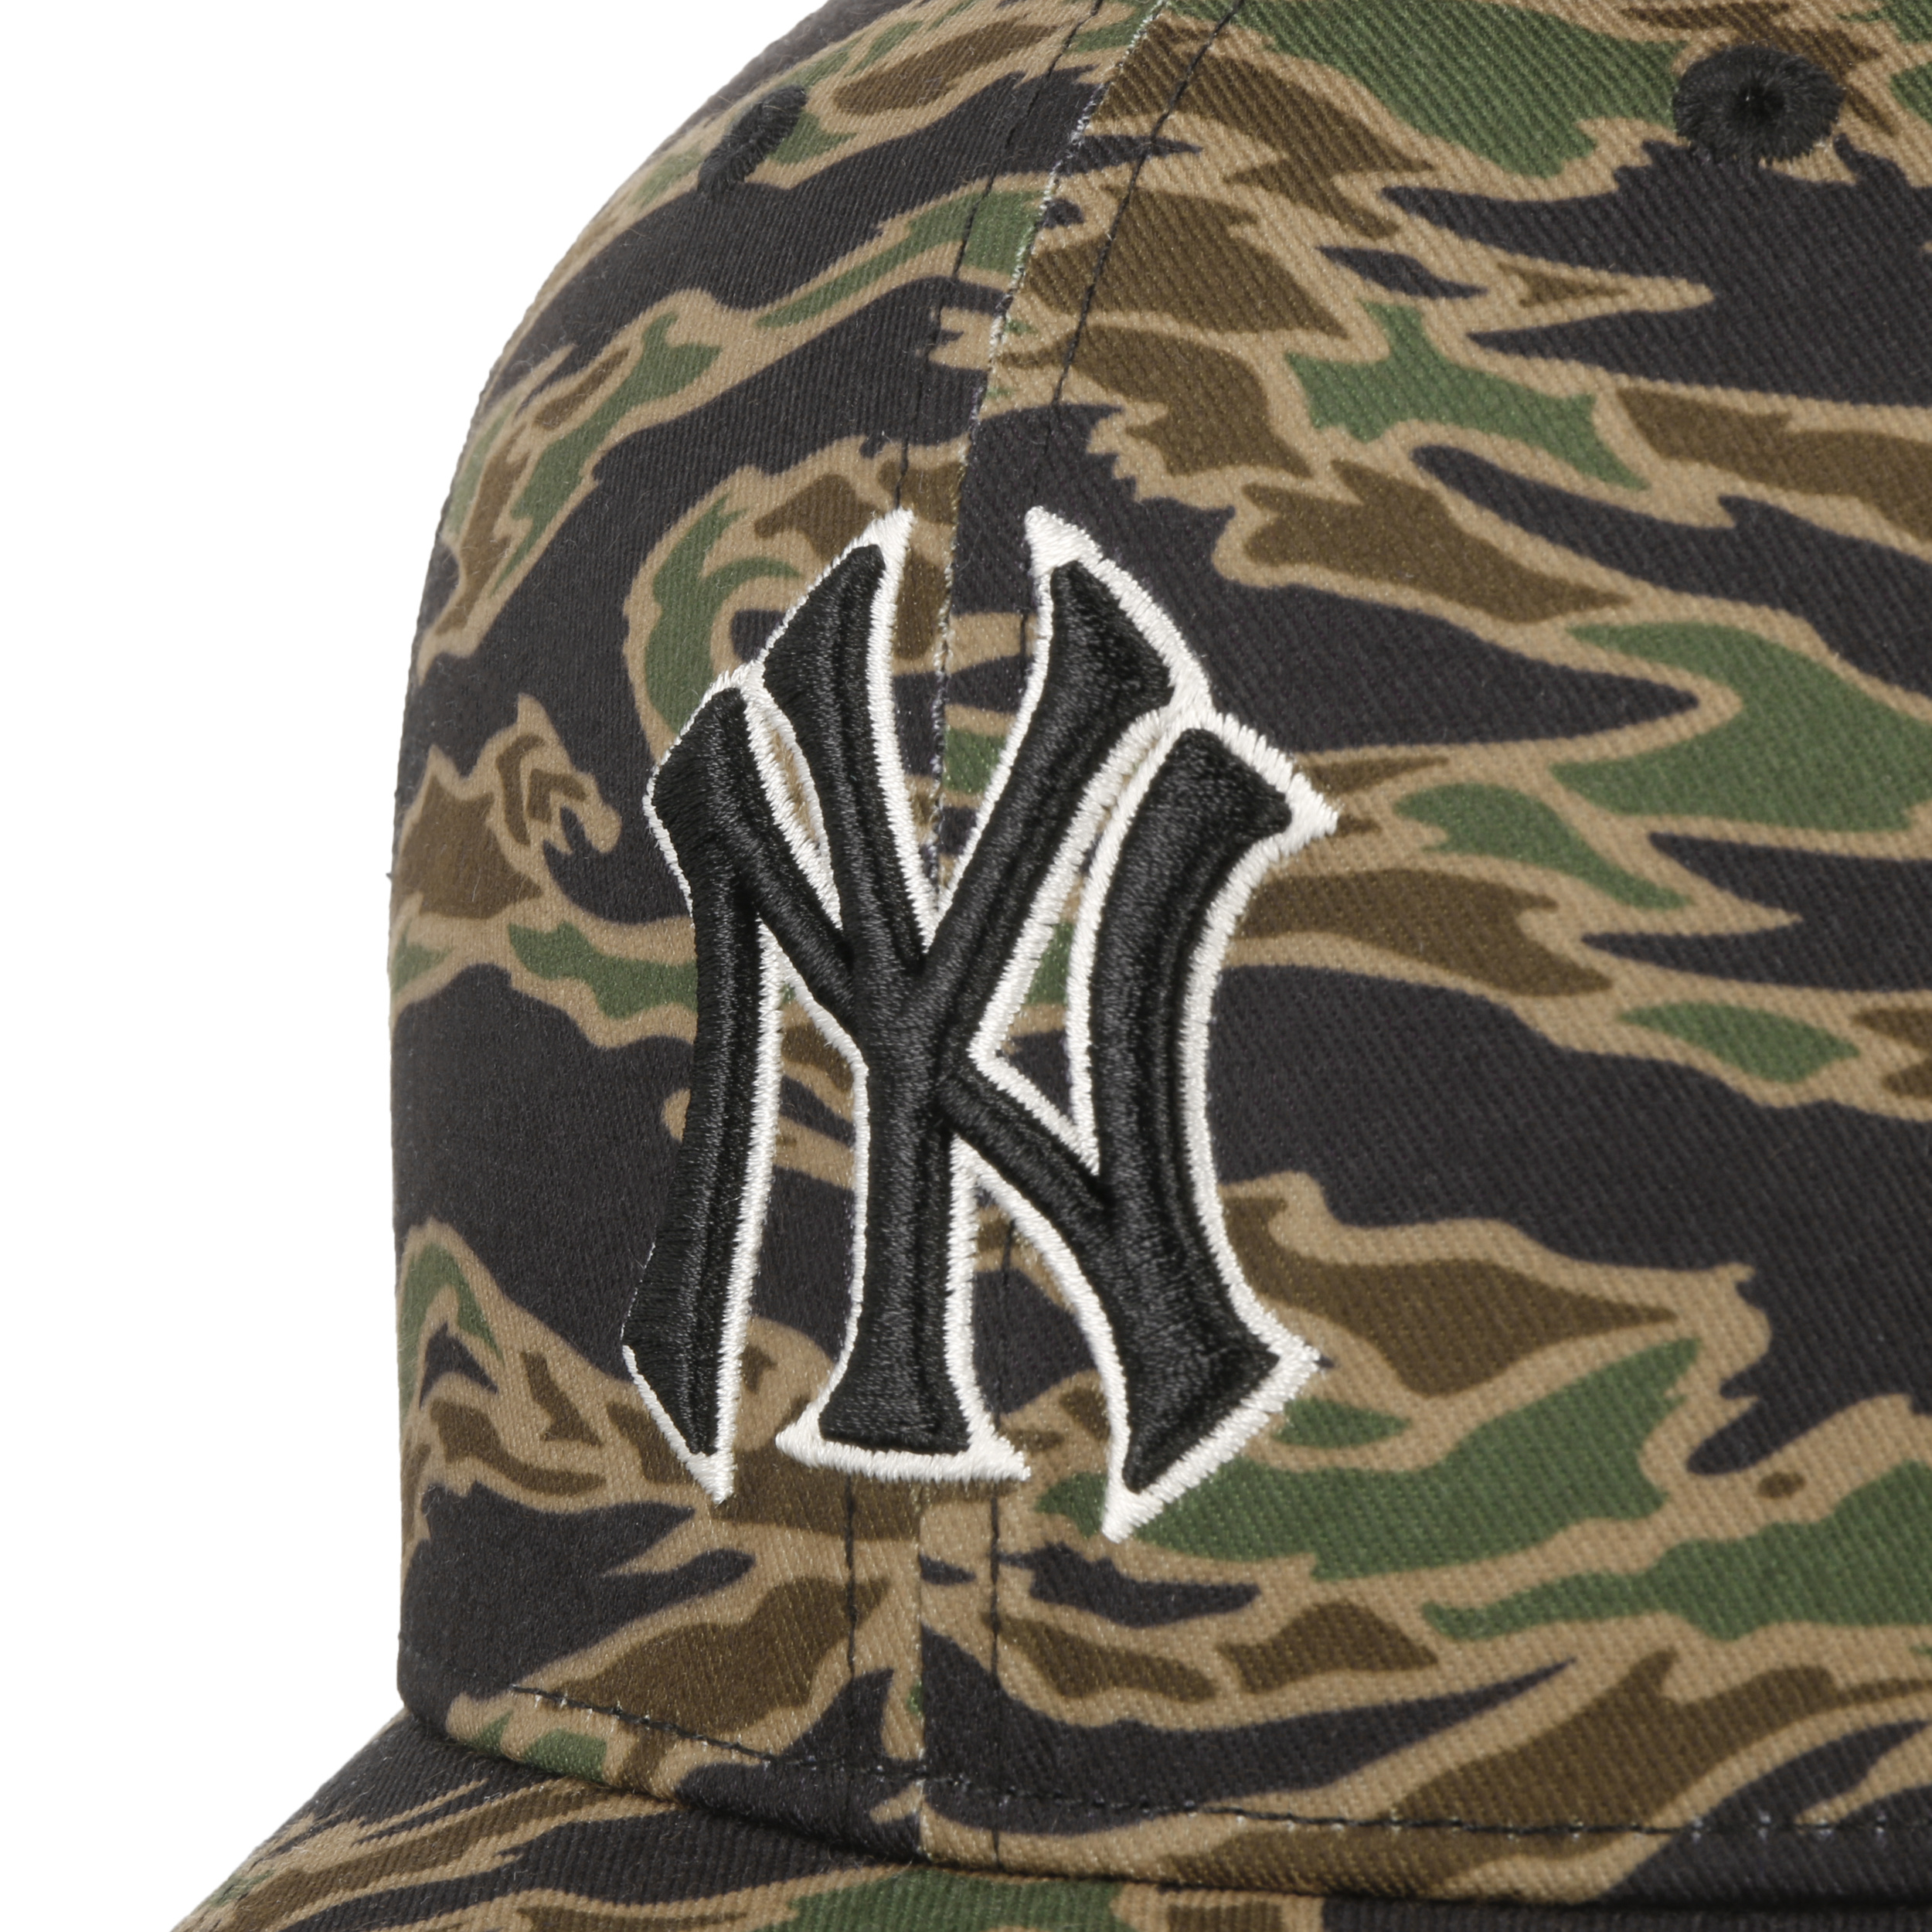 MVP Cold Zone Yankees Cap by 47 Brand